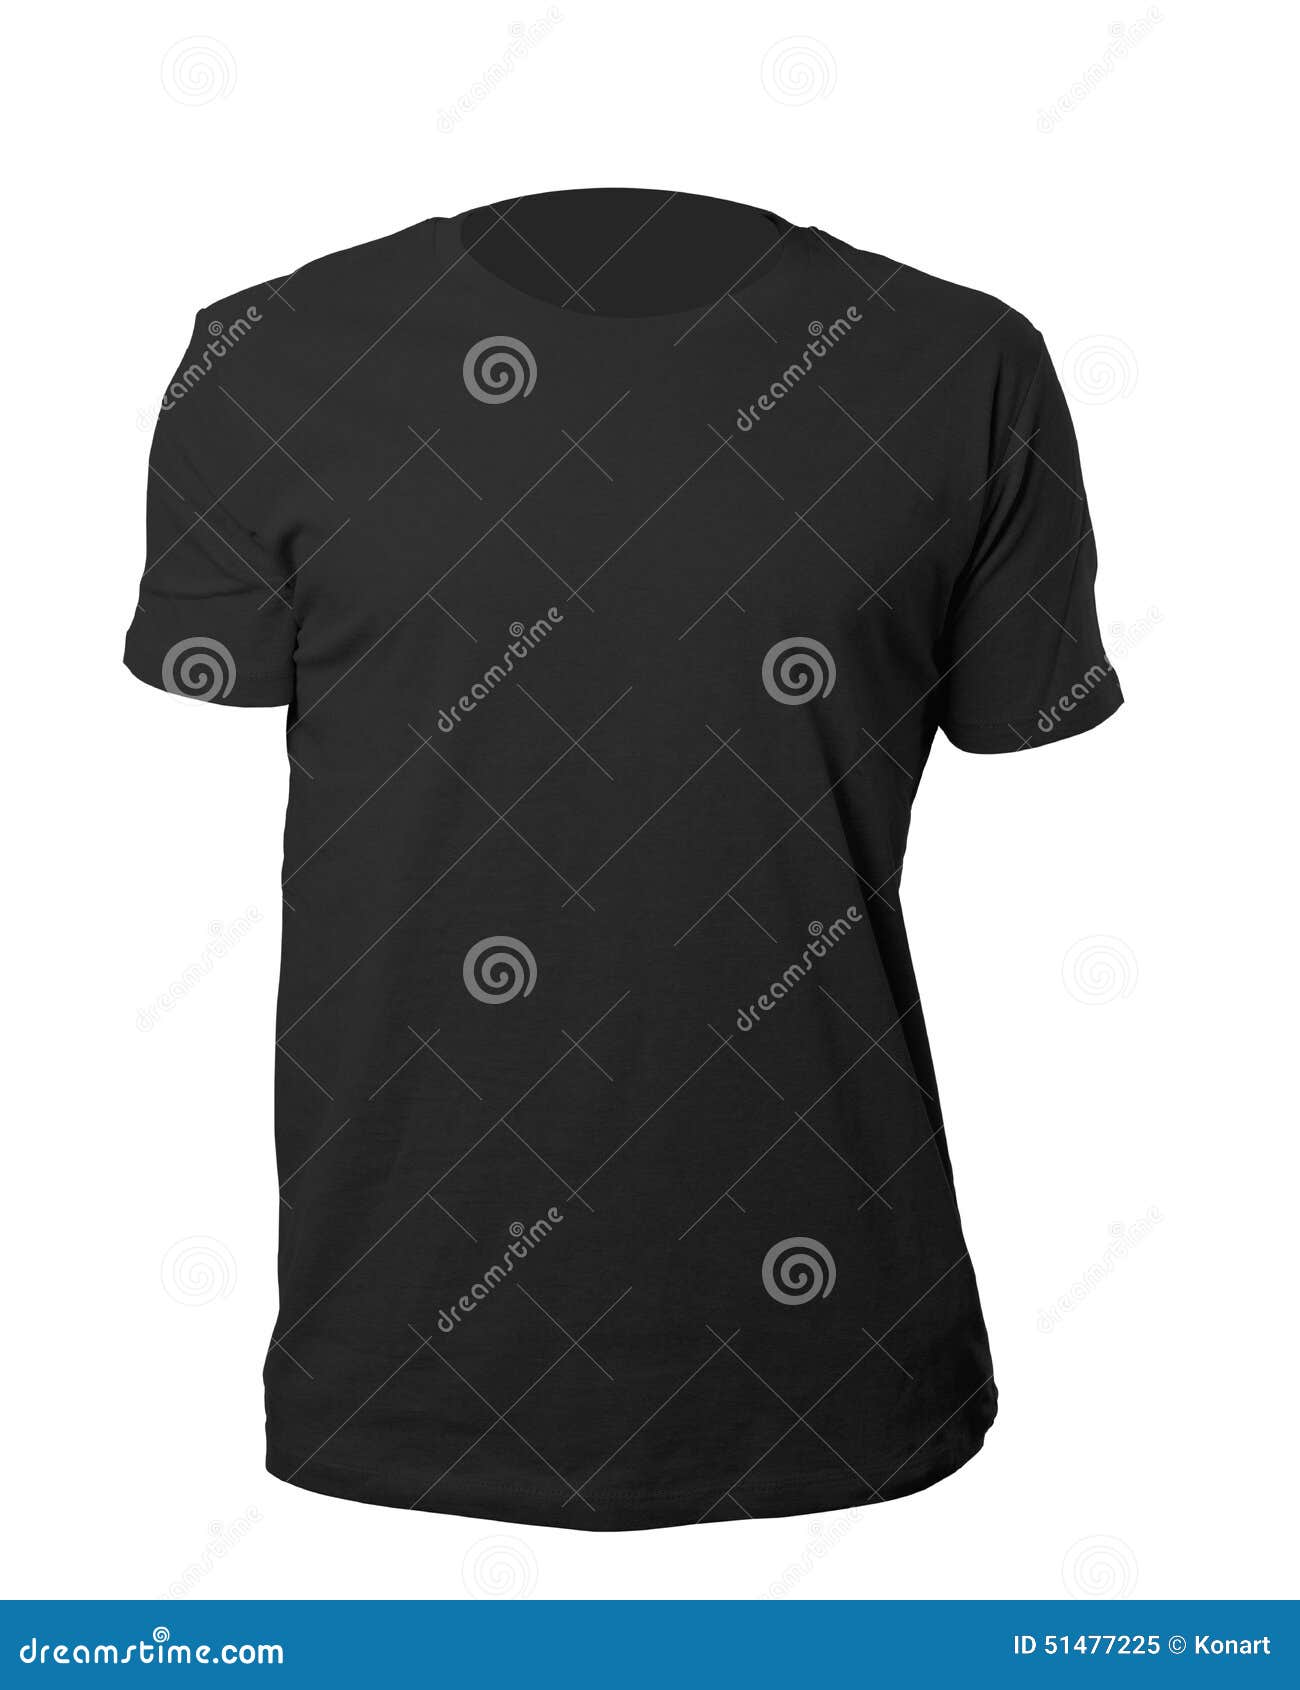 Black shirt template stock image. Image of clipping, plain - 51477225